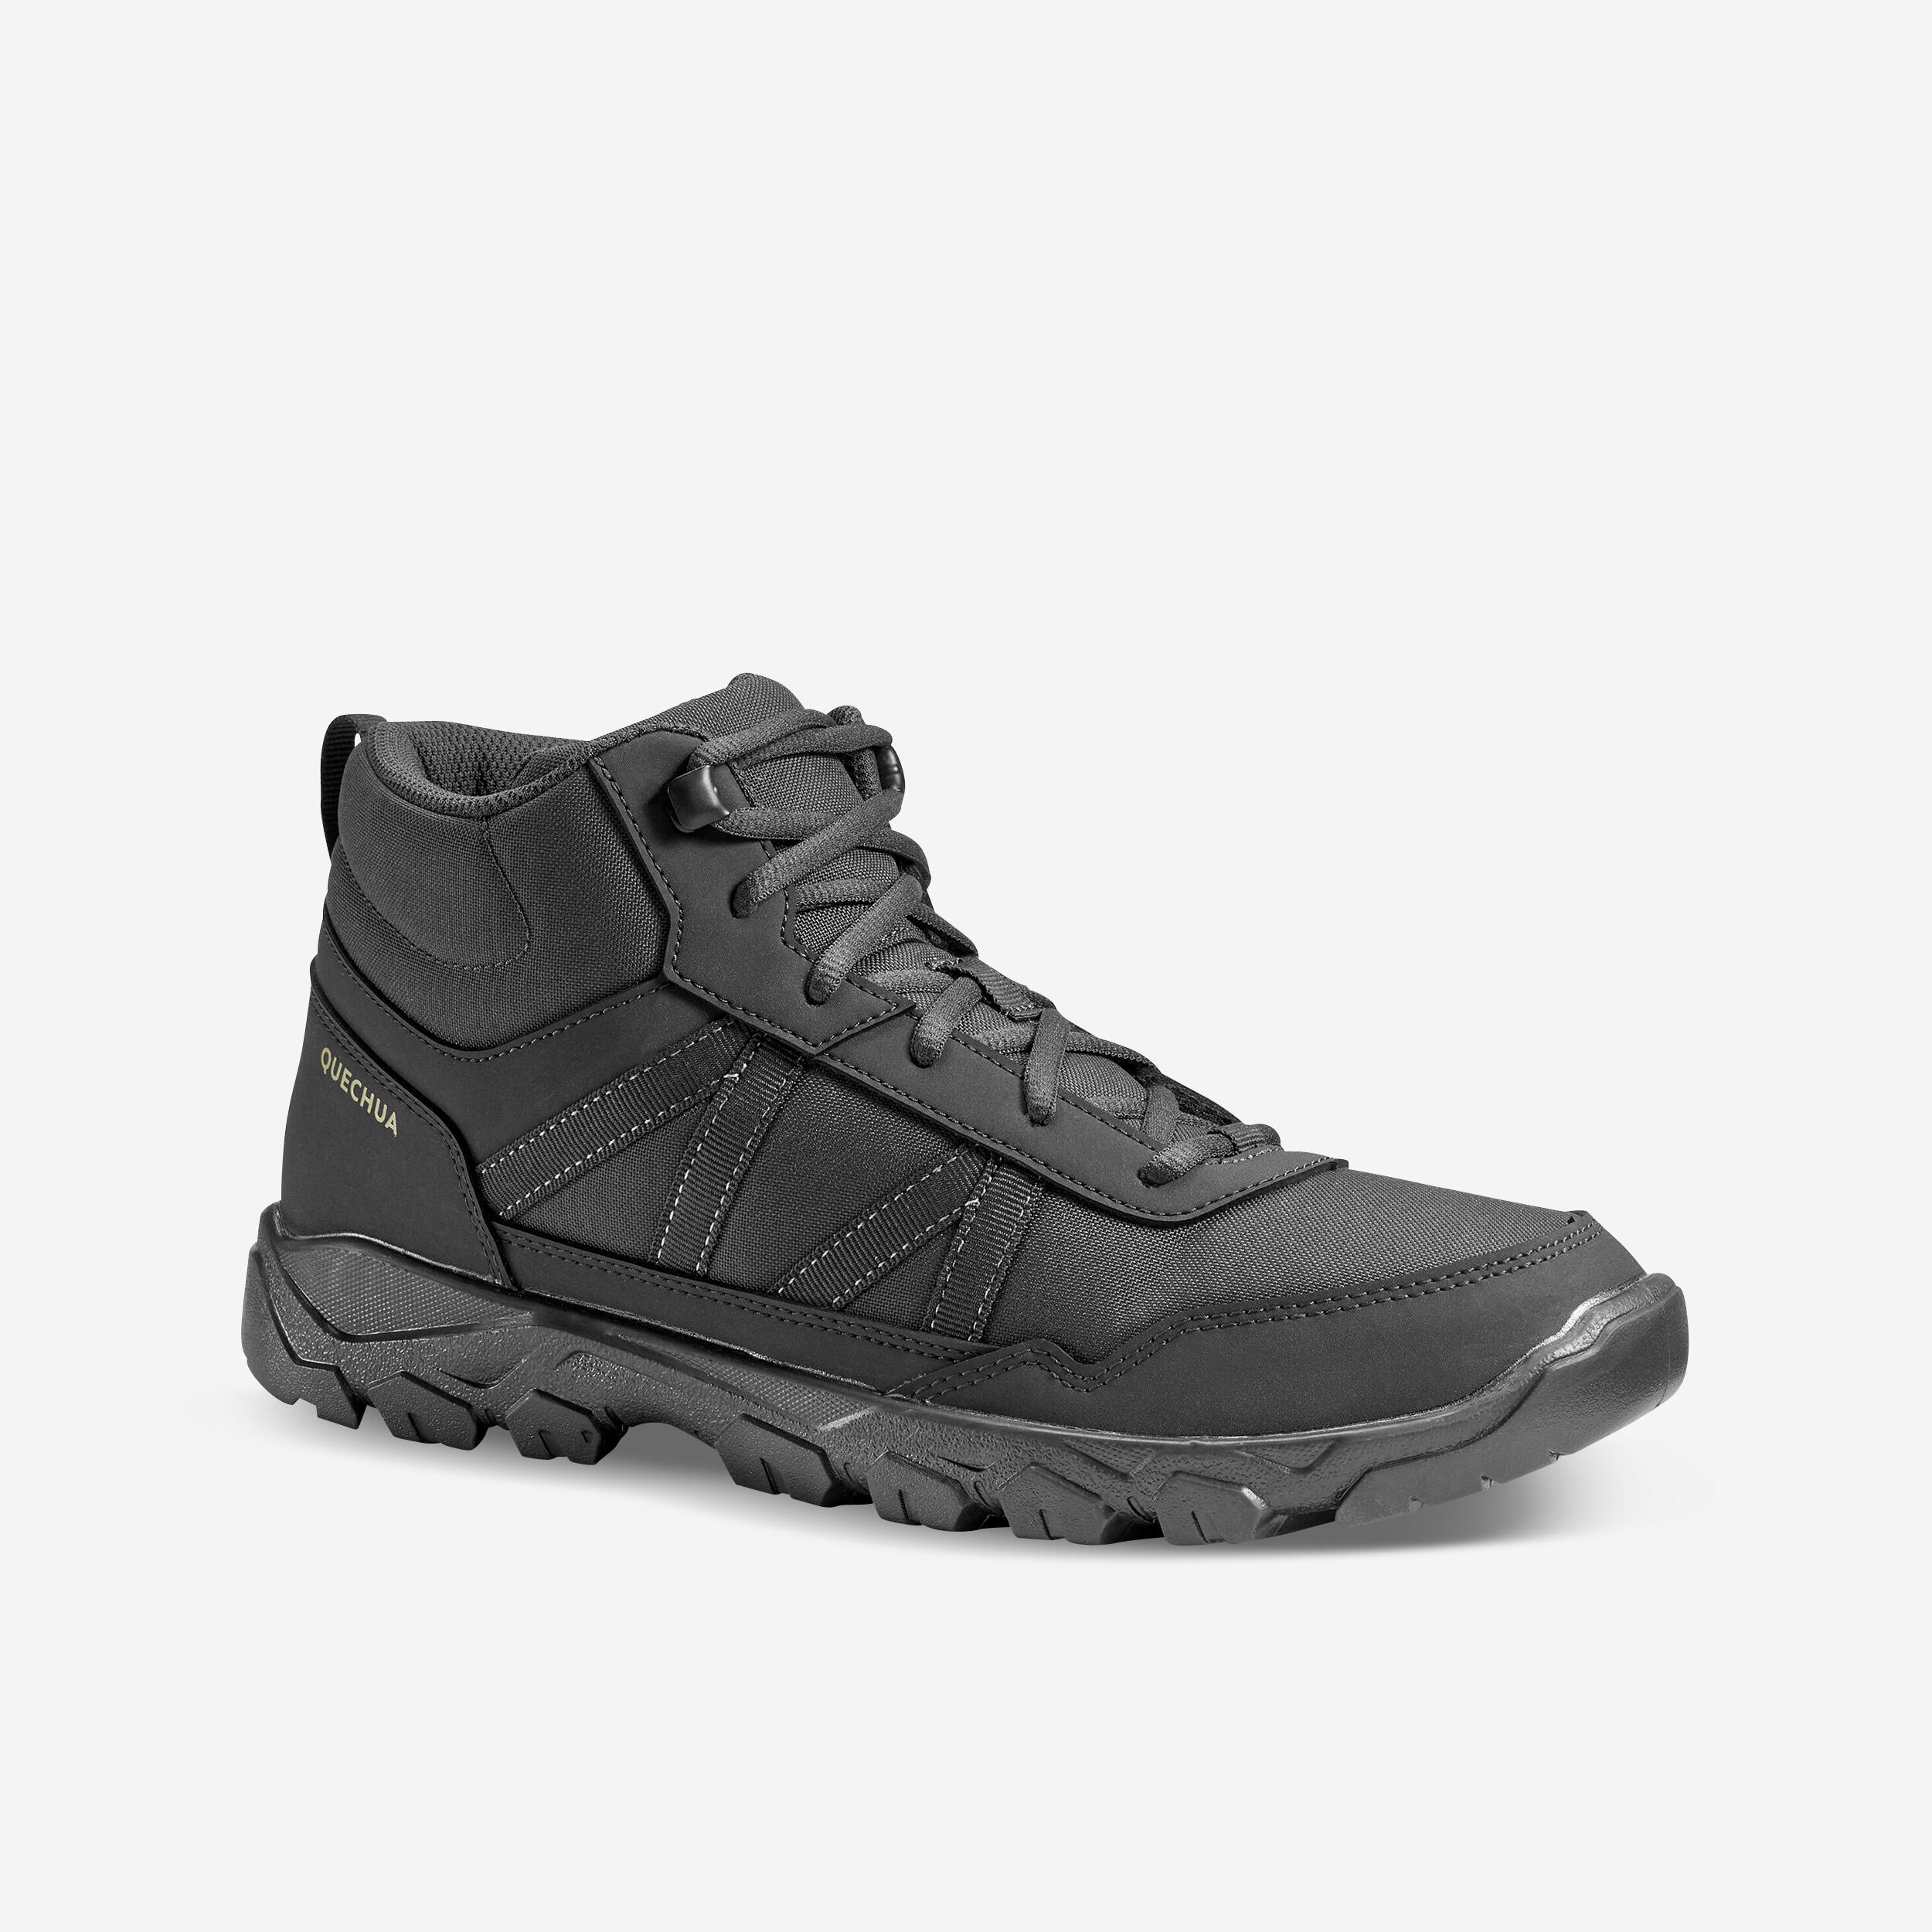 Image of Men’s Hiking Boots - NH 100